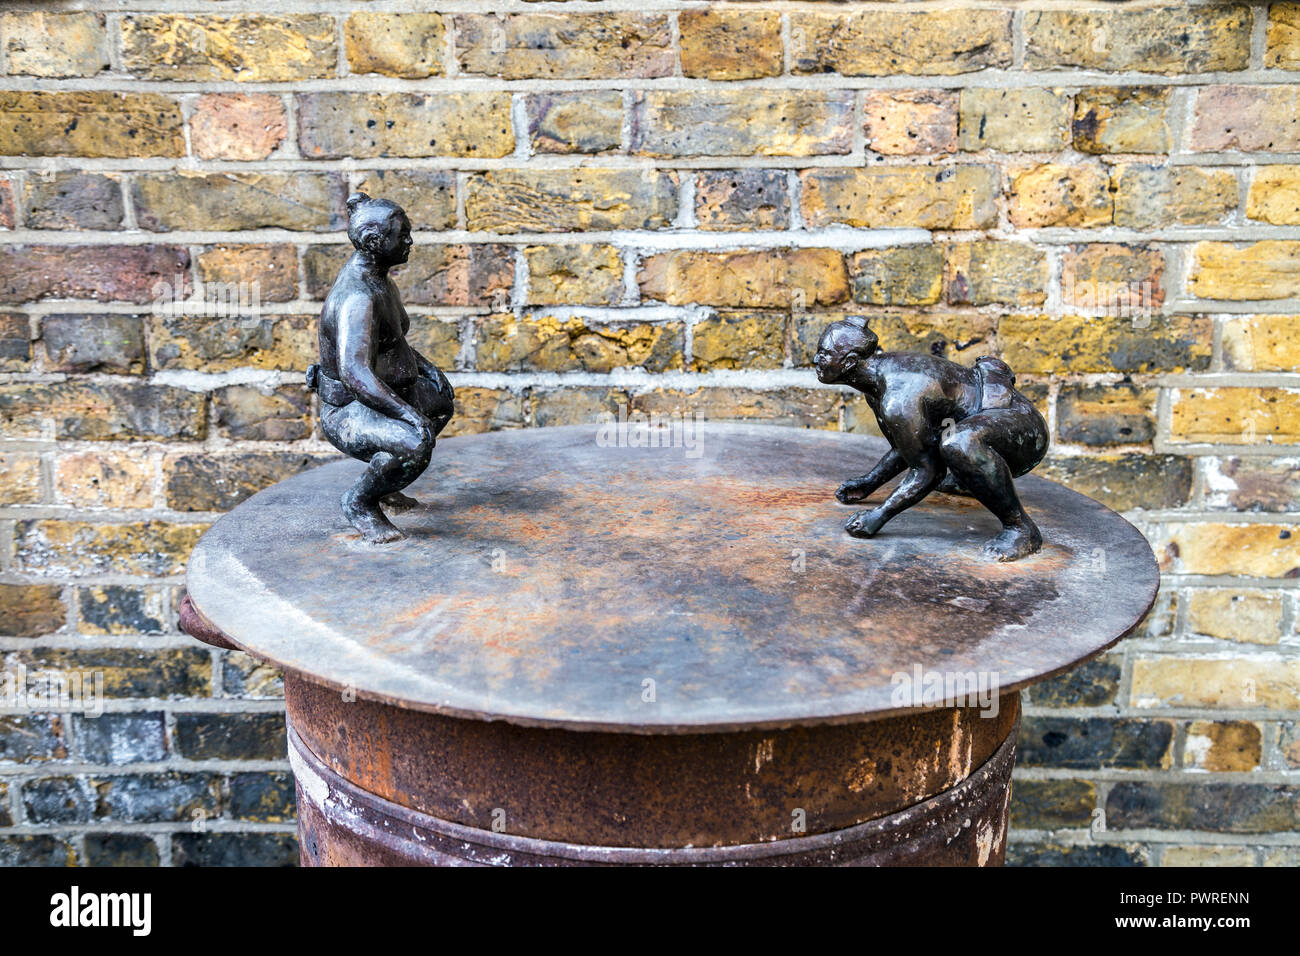 A sculpture of two sumo wrestlers in Trinity Buoy Wharf, London, UK Stock Photo